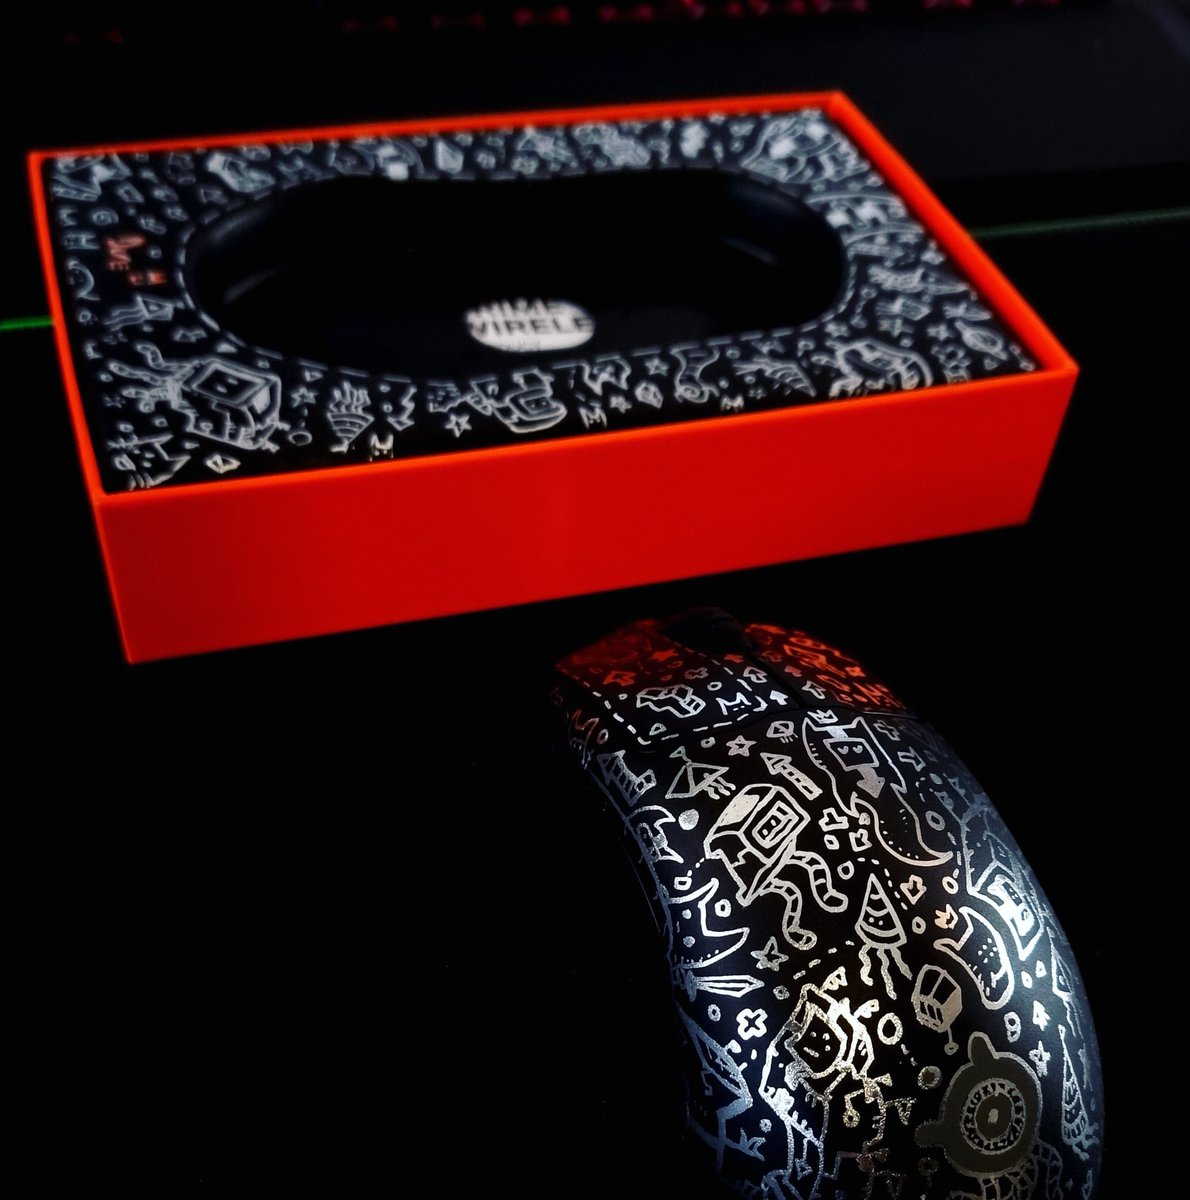 What are you packing mousewise these days? 
📸 handpainted @SteelSeries mouse embued with magic runes of accuracy and protection for oragne coloured snack dust. Silver and orange. #steelseries #gaming #mouse #customized #handpainted #geekgear